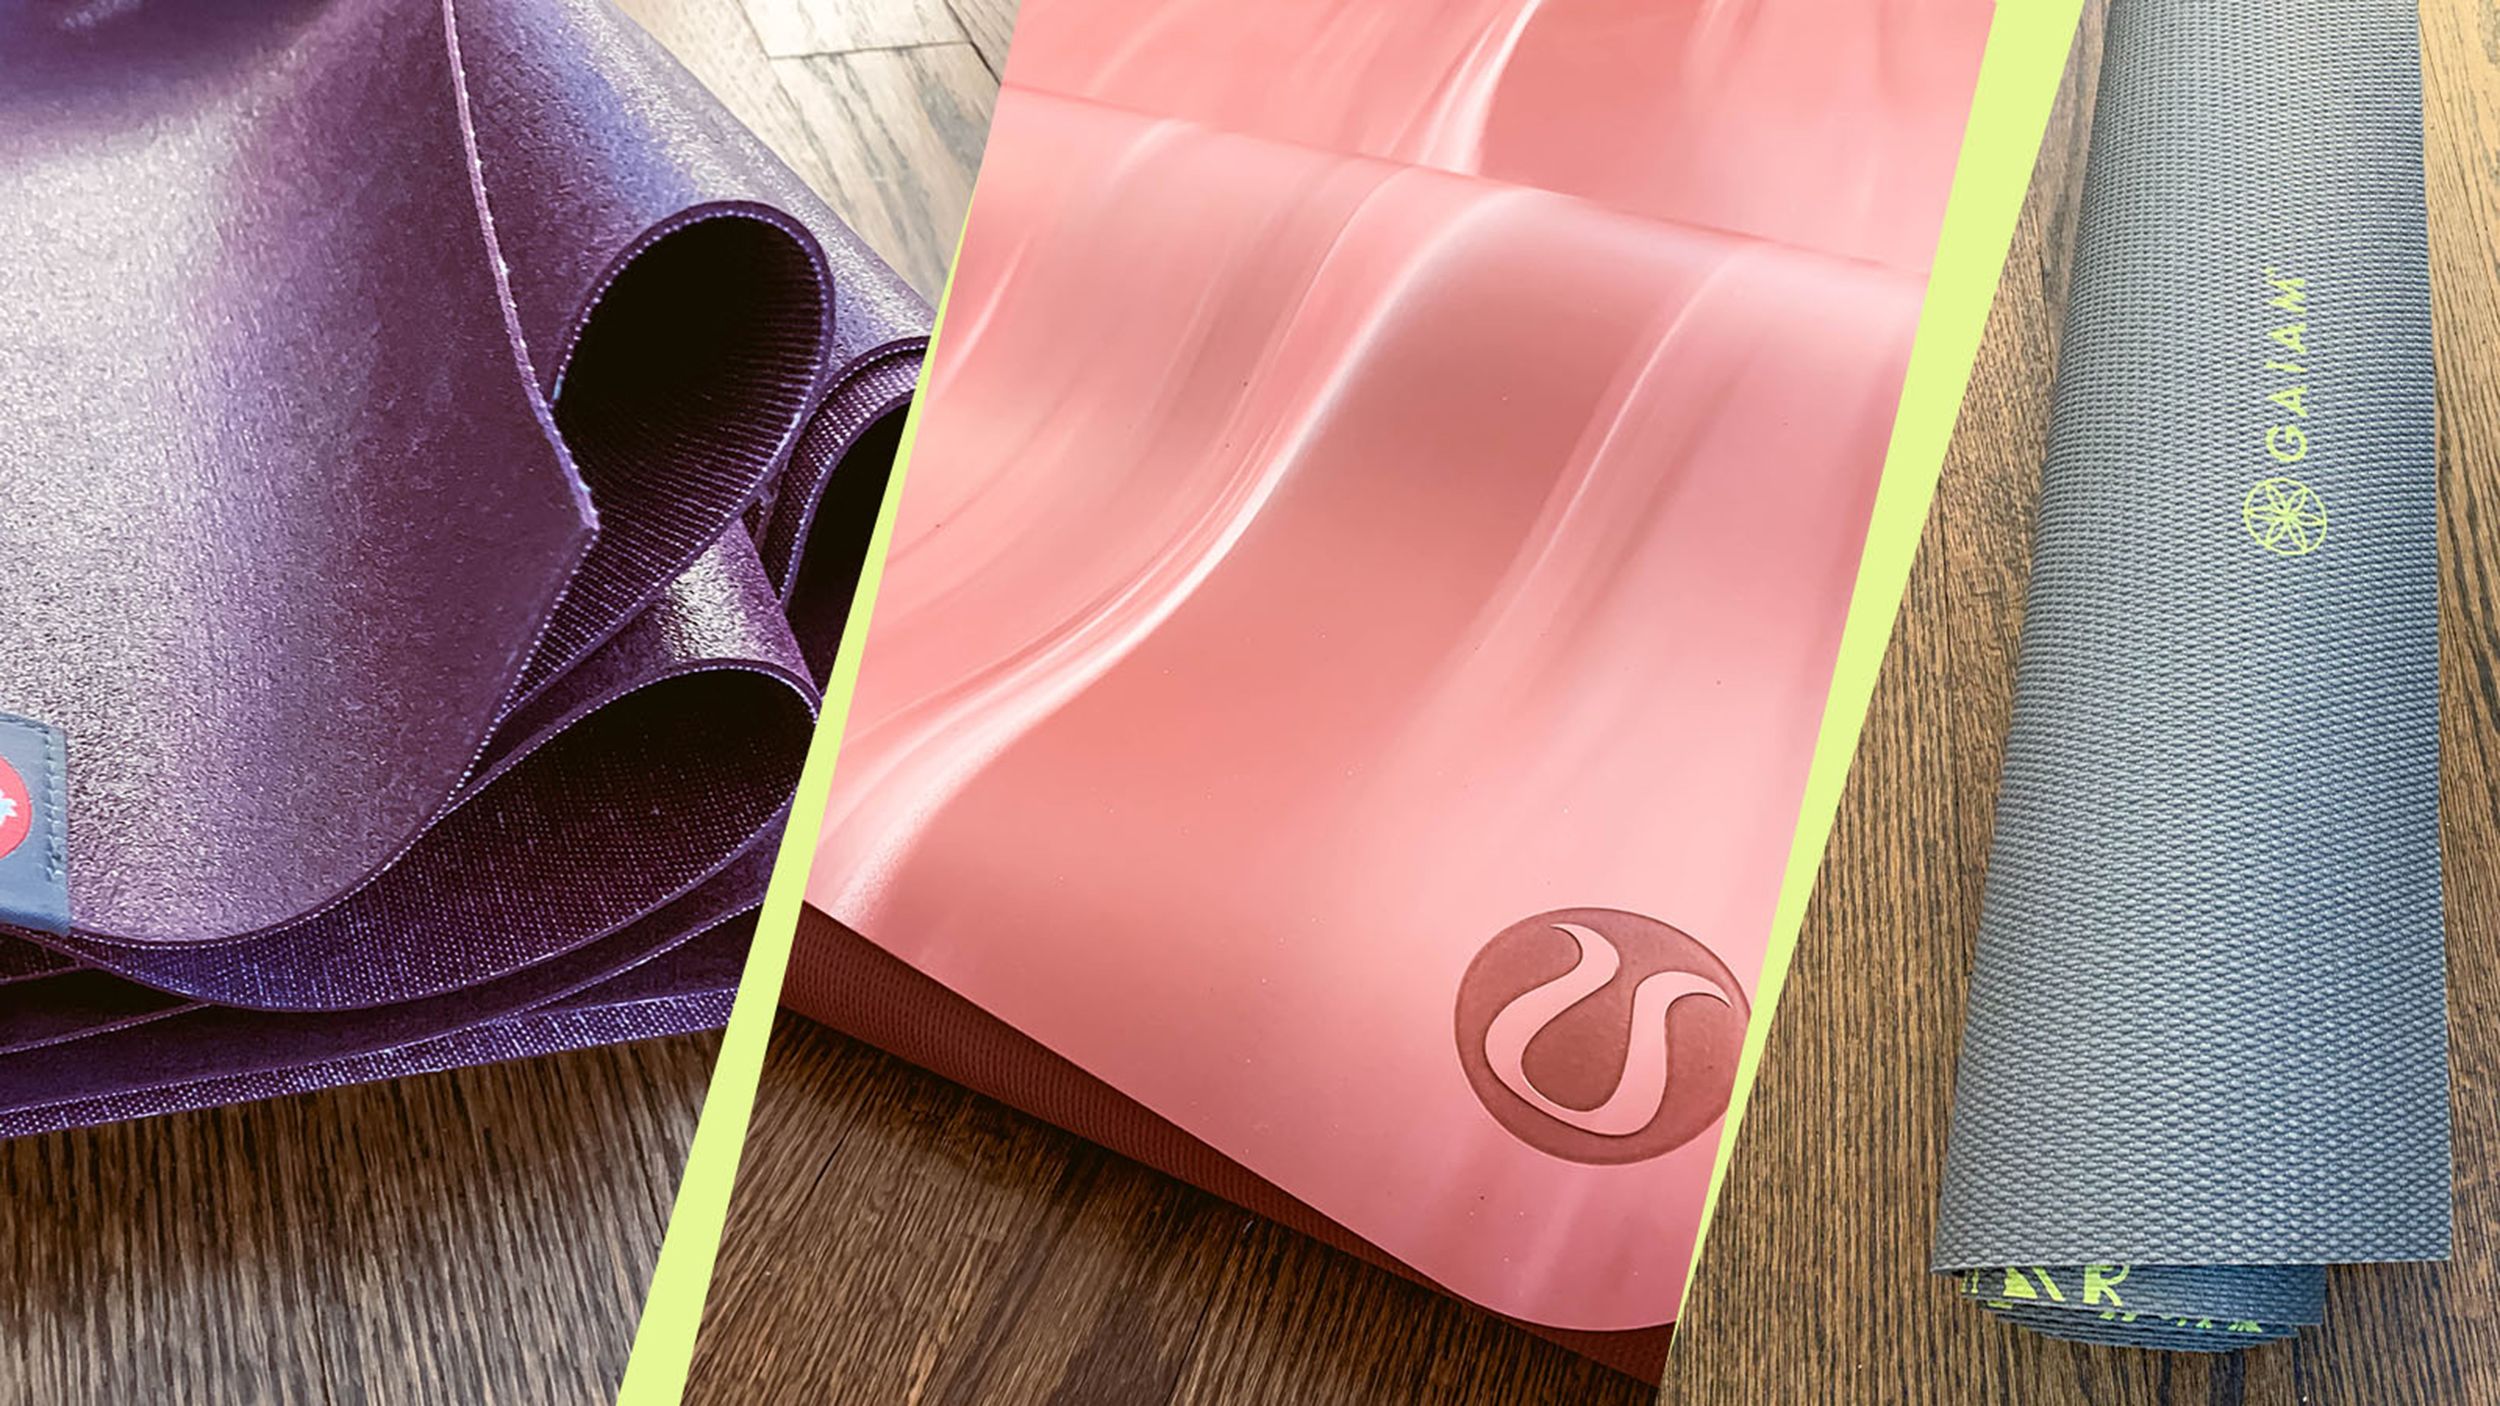 Don't put your yoga mat directly on the carpet.